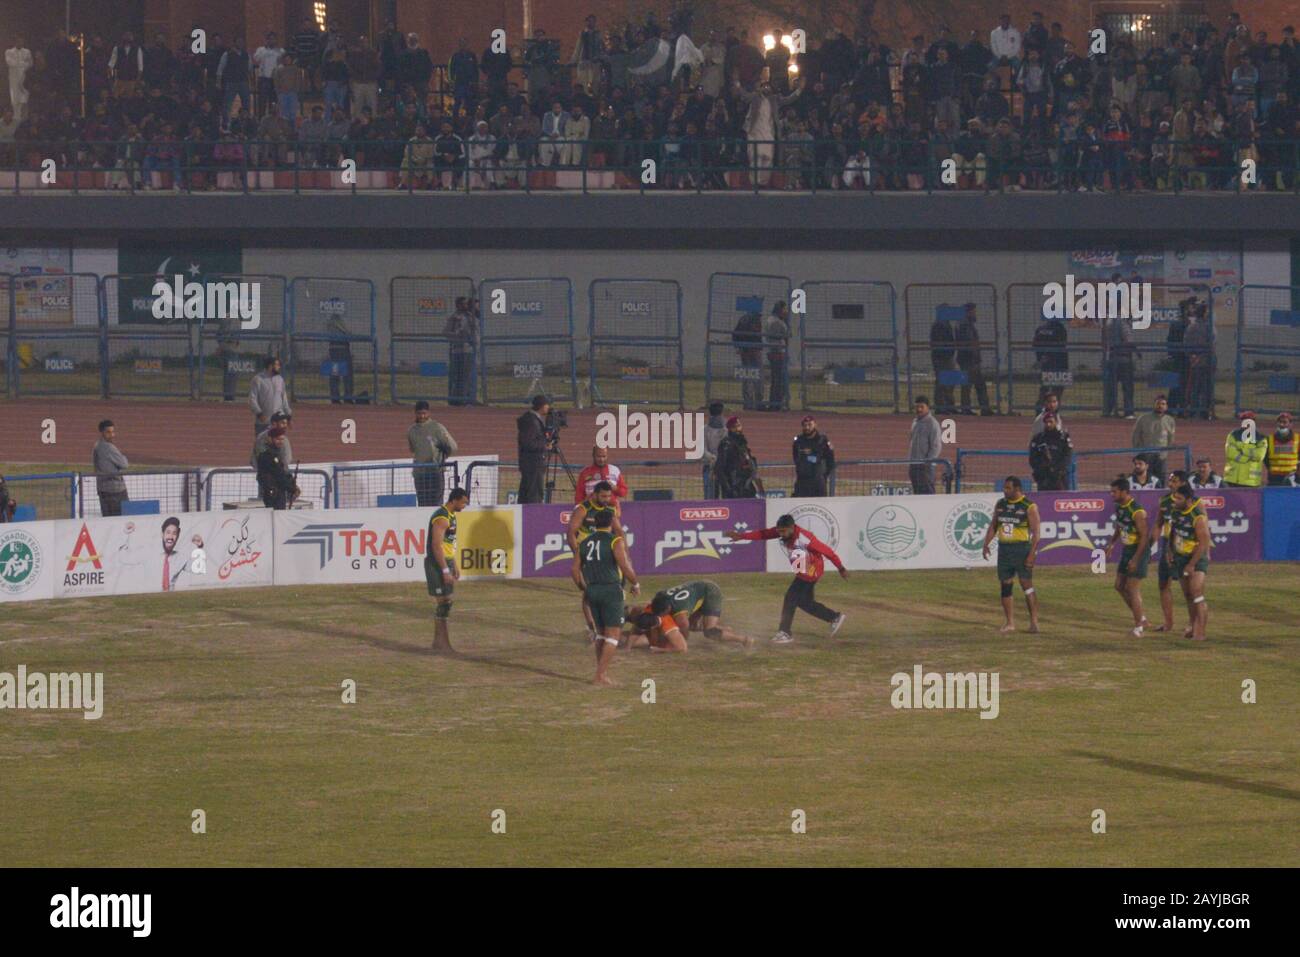 Lahore, Pakistan. 15th Feb, 2020. Kabaddi players seem in action during 2nd Semi final match playing between Pakistan and Iran, as Pakistan Kabaddi team win semi final match by 52-30 during Kabaddi World Cup 2020 at Punjab Stadium Lahore on February 15, 2020. Kabaddi World Cup 2020 begins in Pakistan. All is set for the 'Kabaddi World Cup 2020' being hosted in three cities Lahore, Faisalabad and Gujrat from February 09 to 16 February. Respectively the event is jointly organized by Punjab government, Sports Board Punjab (SBP) and Pakistan Kabaddi Federation (PKF). Credit: Pacific Press Agency/A Stock Photo